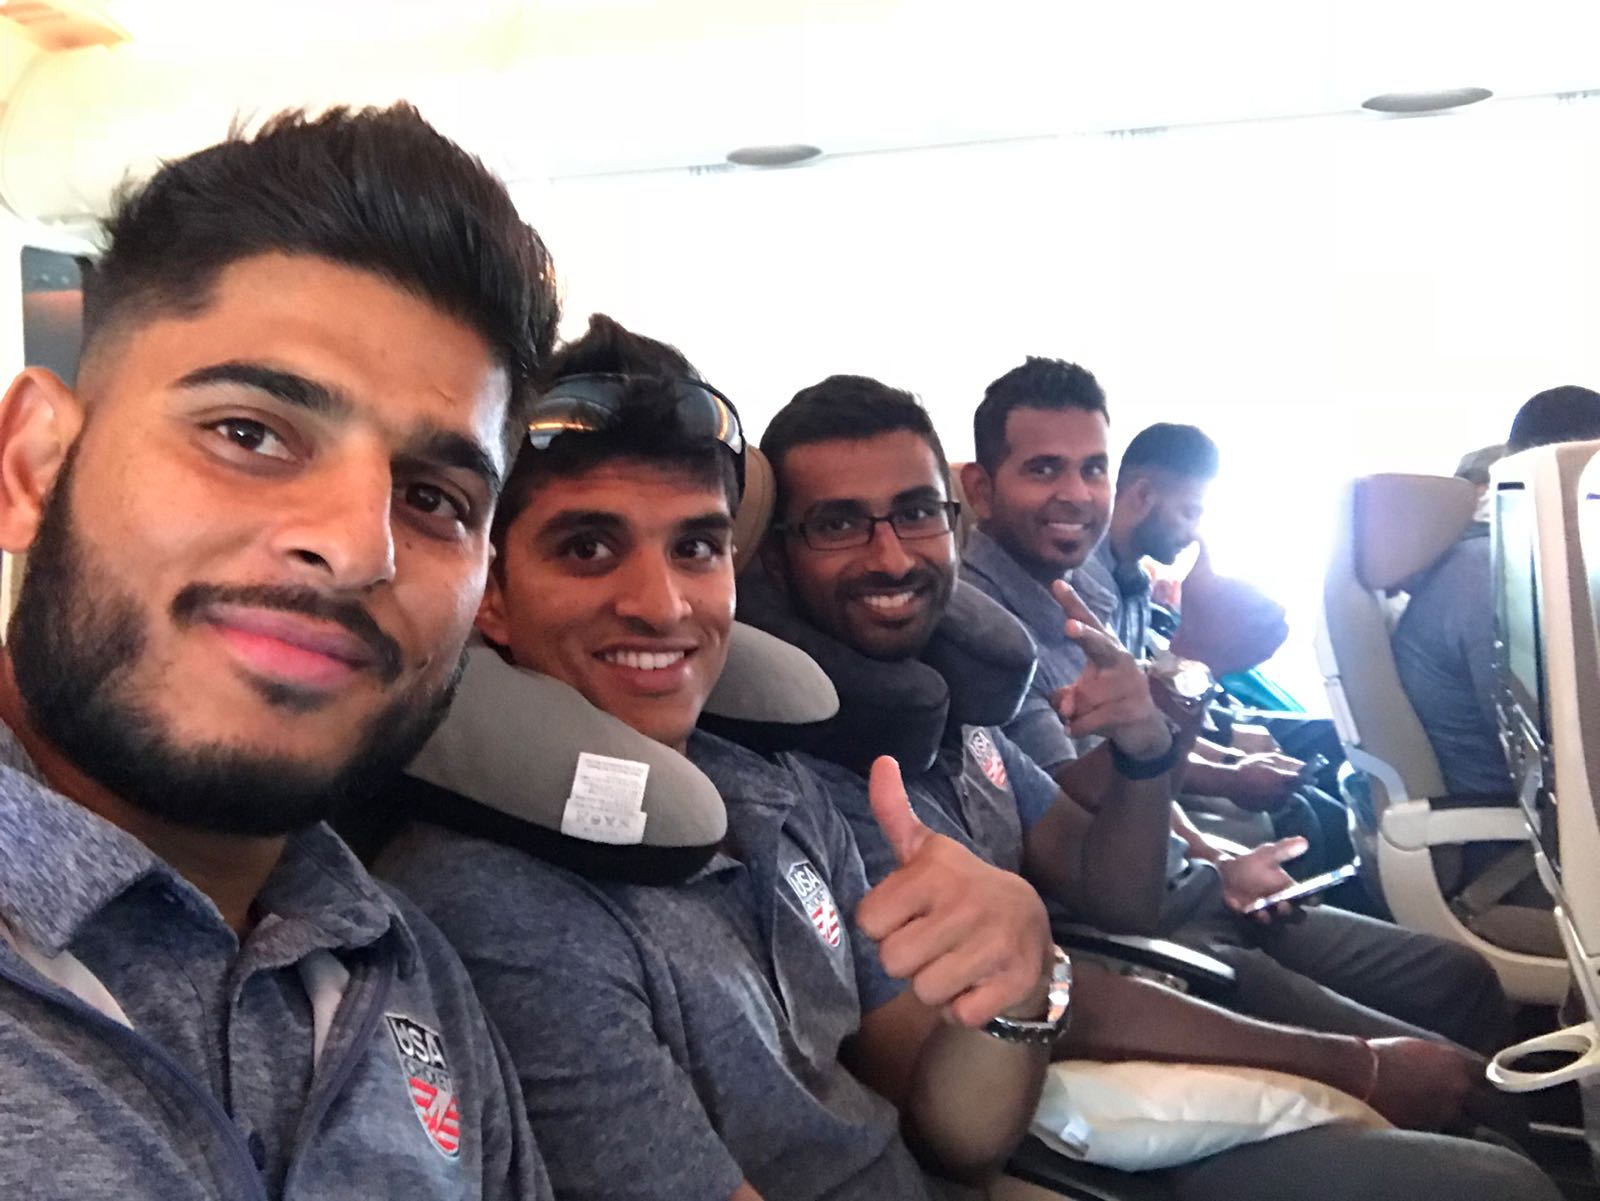 Team USA Depart for Middle East Tour